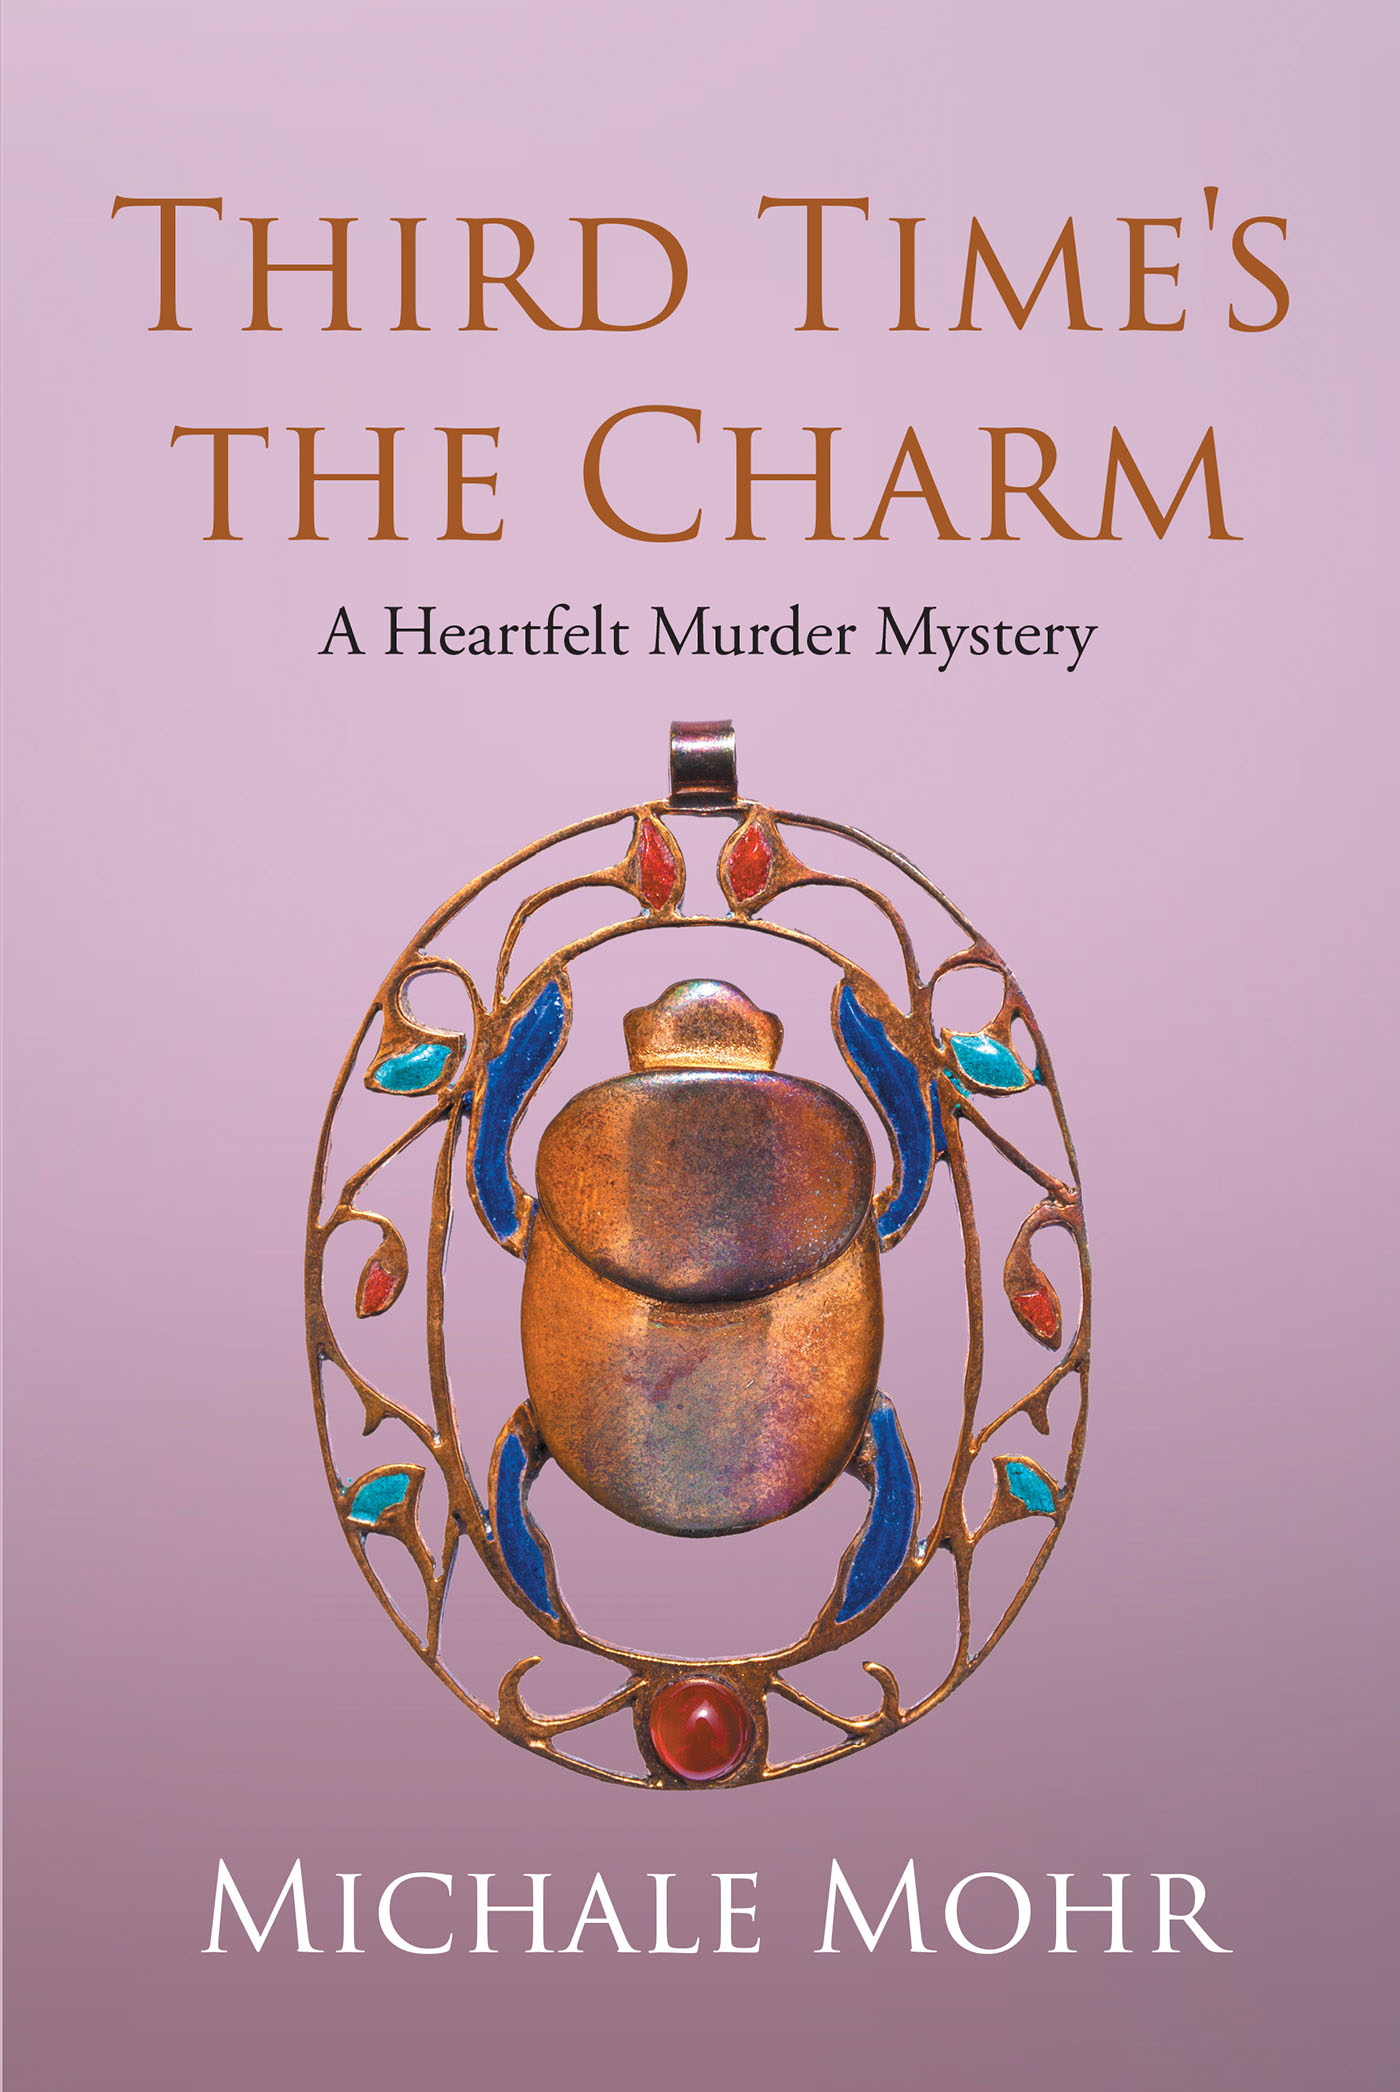 Author Michale Mohr’s New Book, “Third Time’s the Charm: A Heartfelt Murder Mystery,” is a Fast-Moving Murder Mystery Full of Twists and Turns